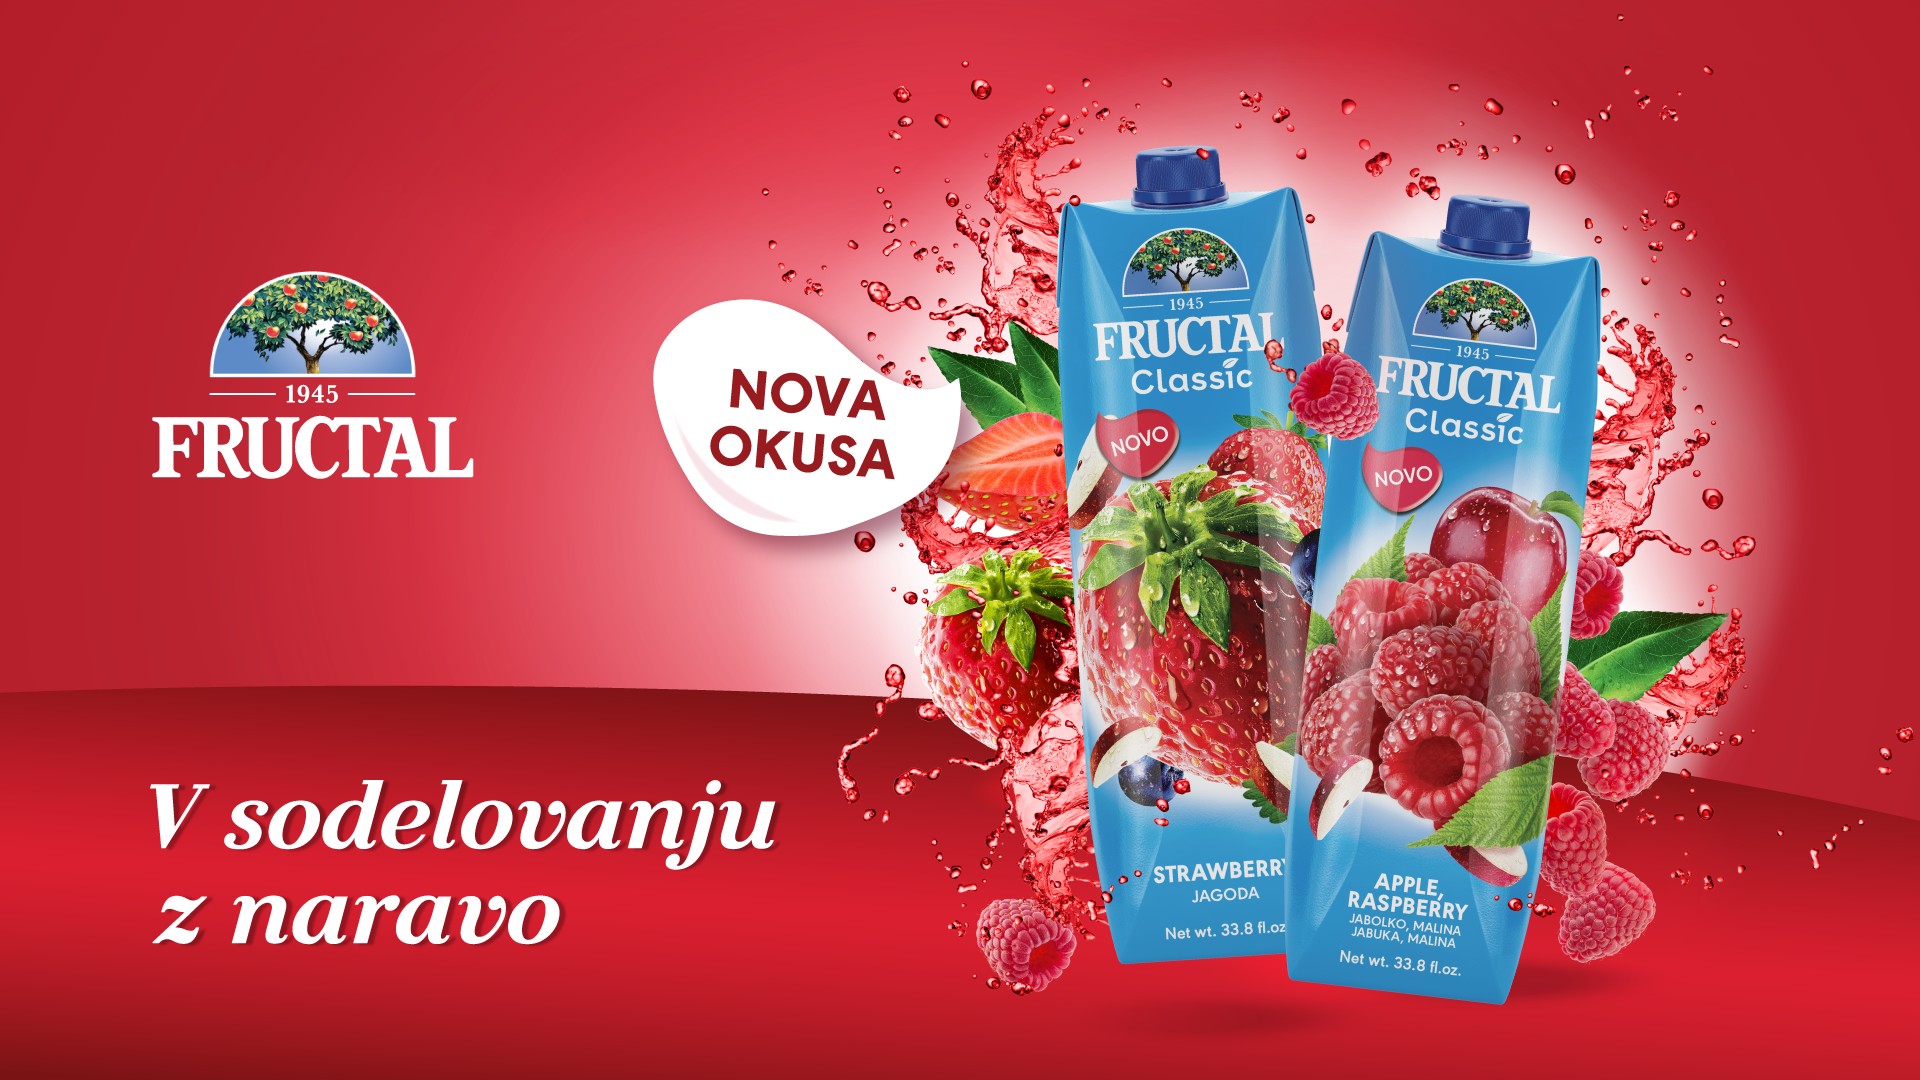 Fructal-Classic-banner-623addd060c8c.png